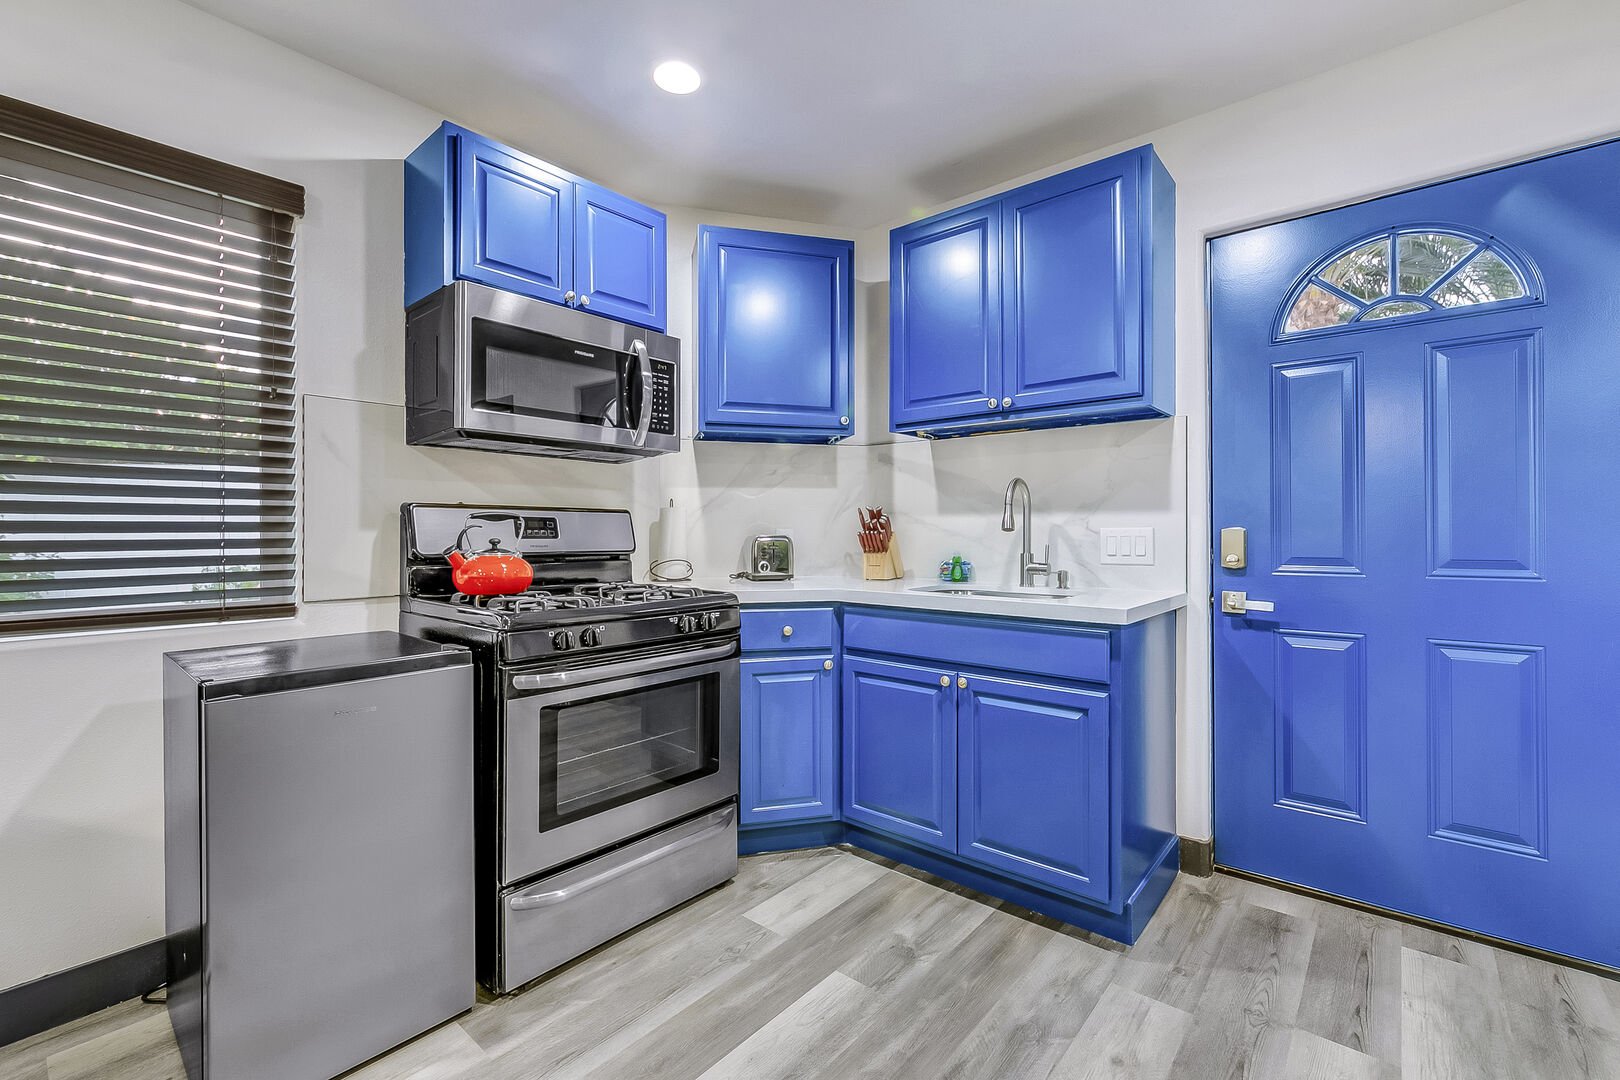 The kitchenette area is well-equipped with a 4-burner range, a built-in microwave, and a sink.